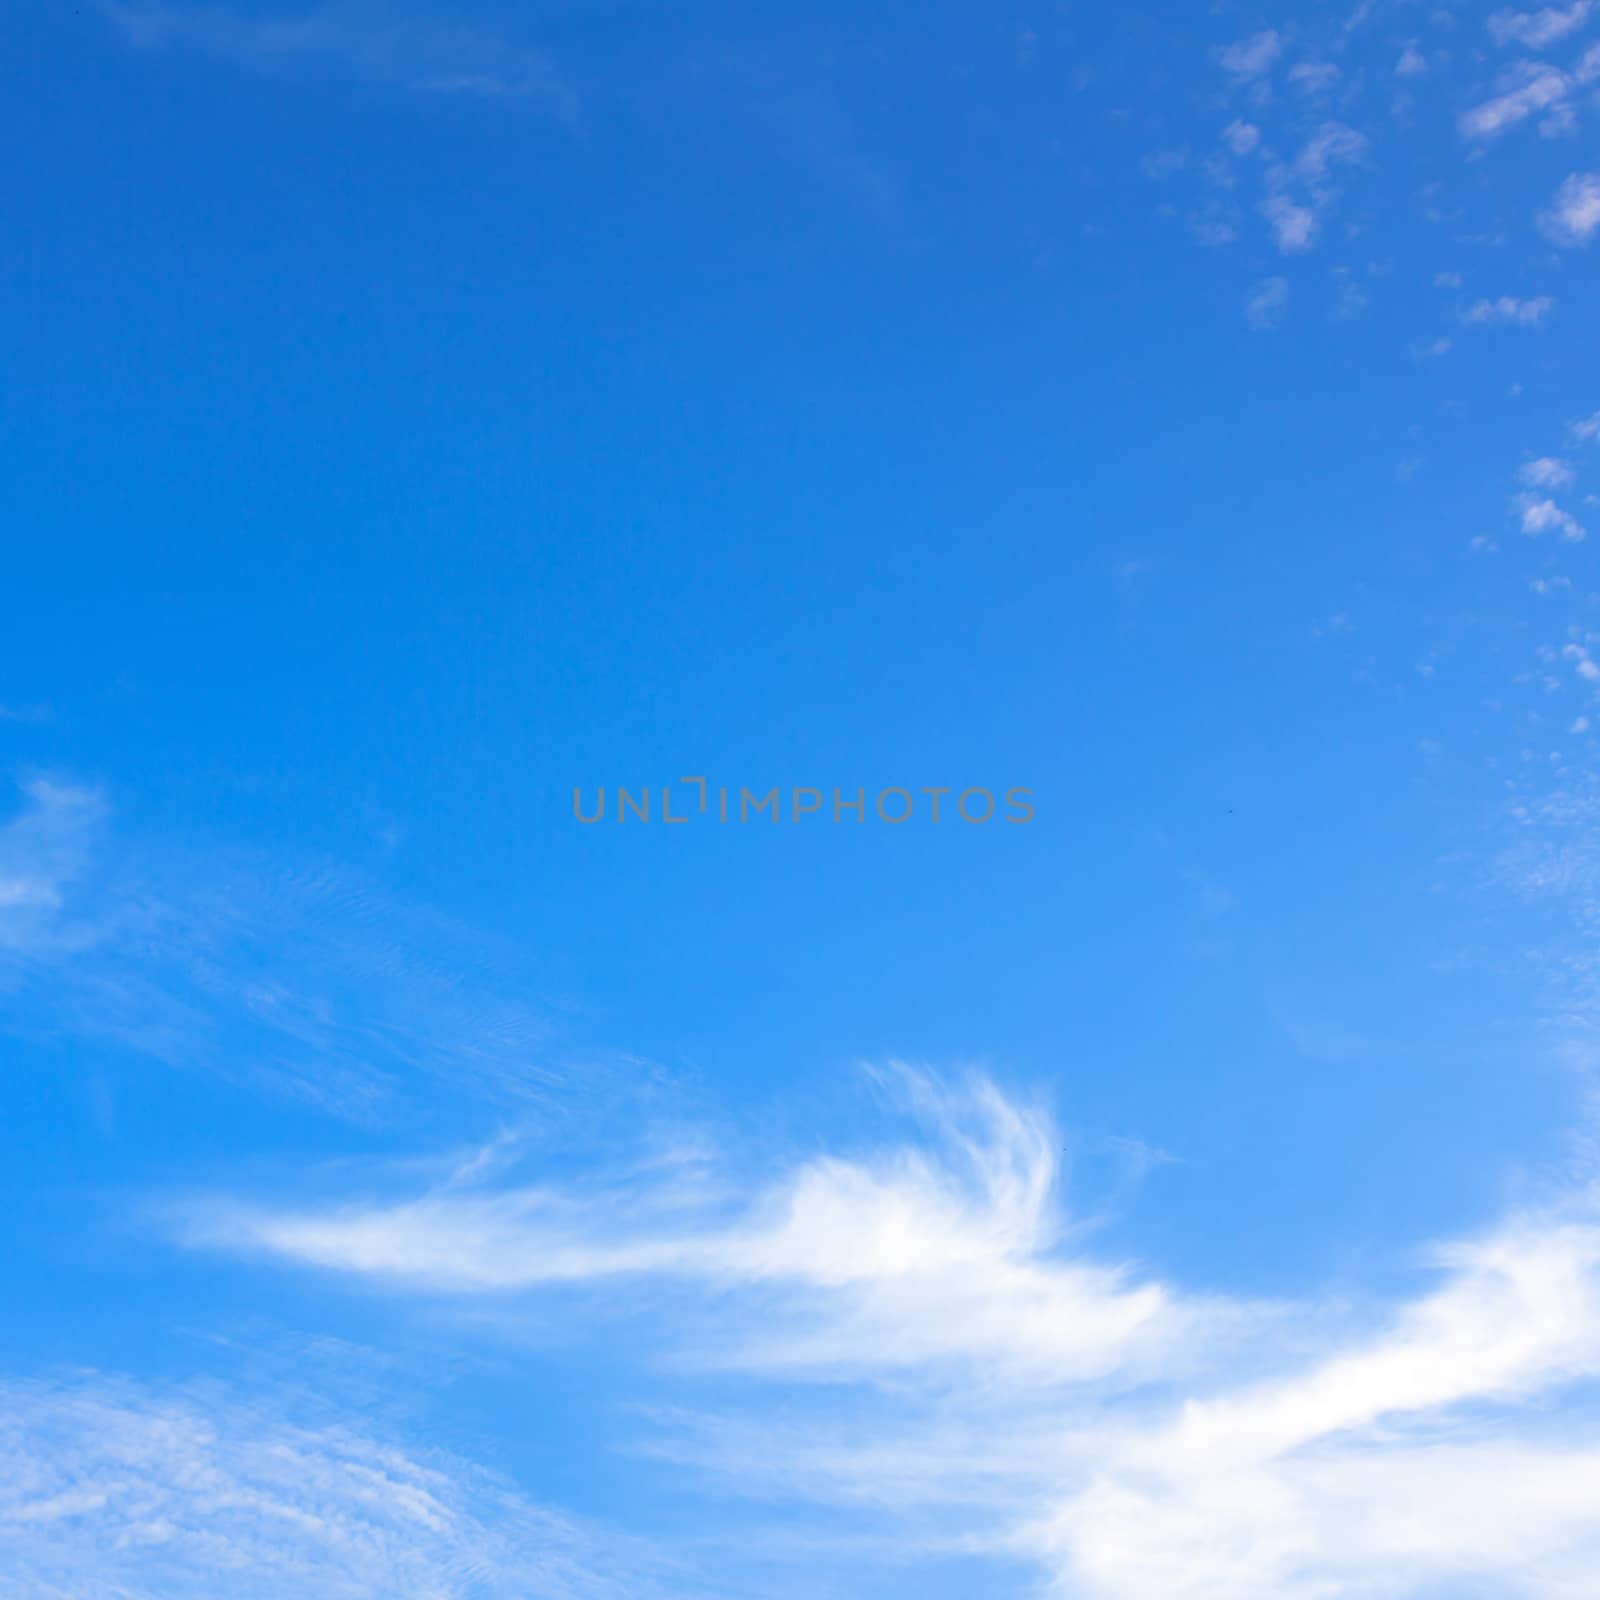 clouds in the blue sky  by wyoosumran